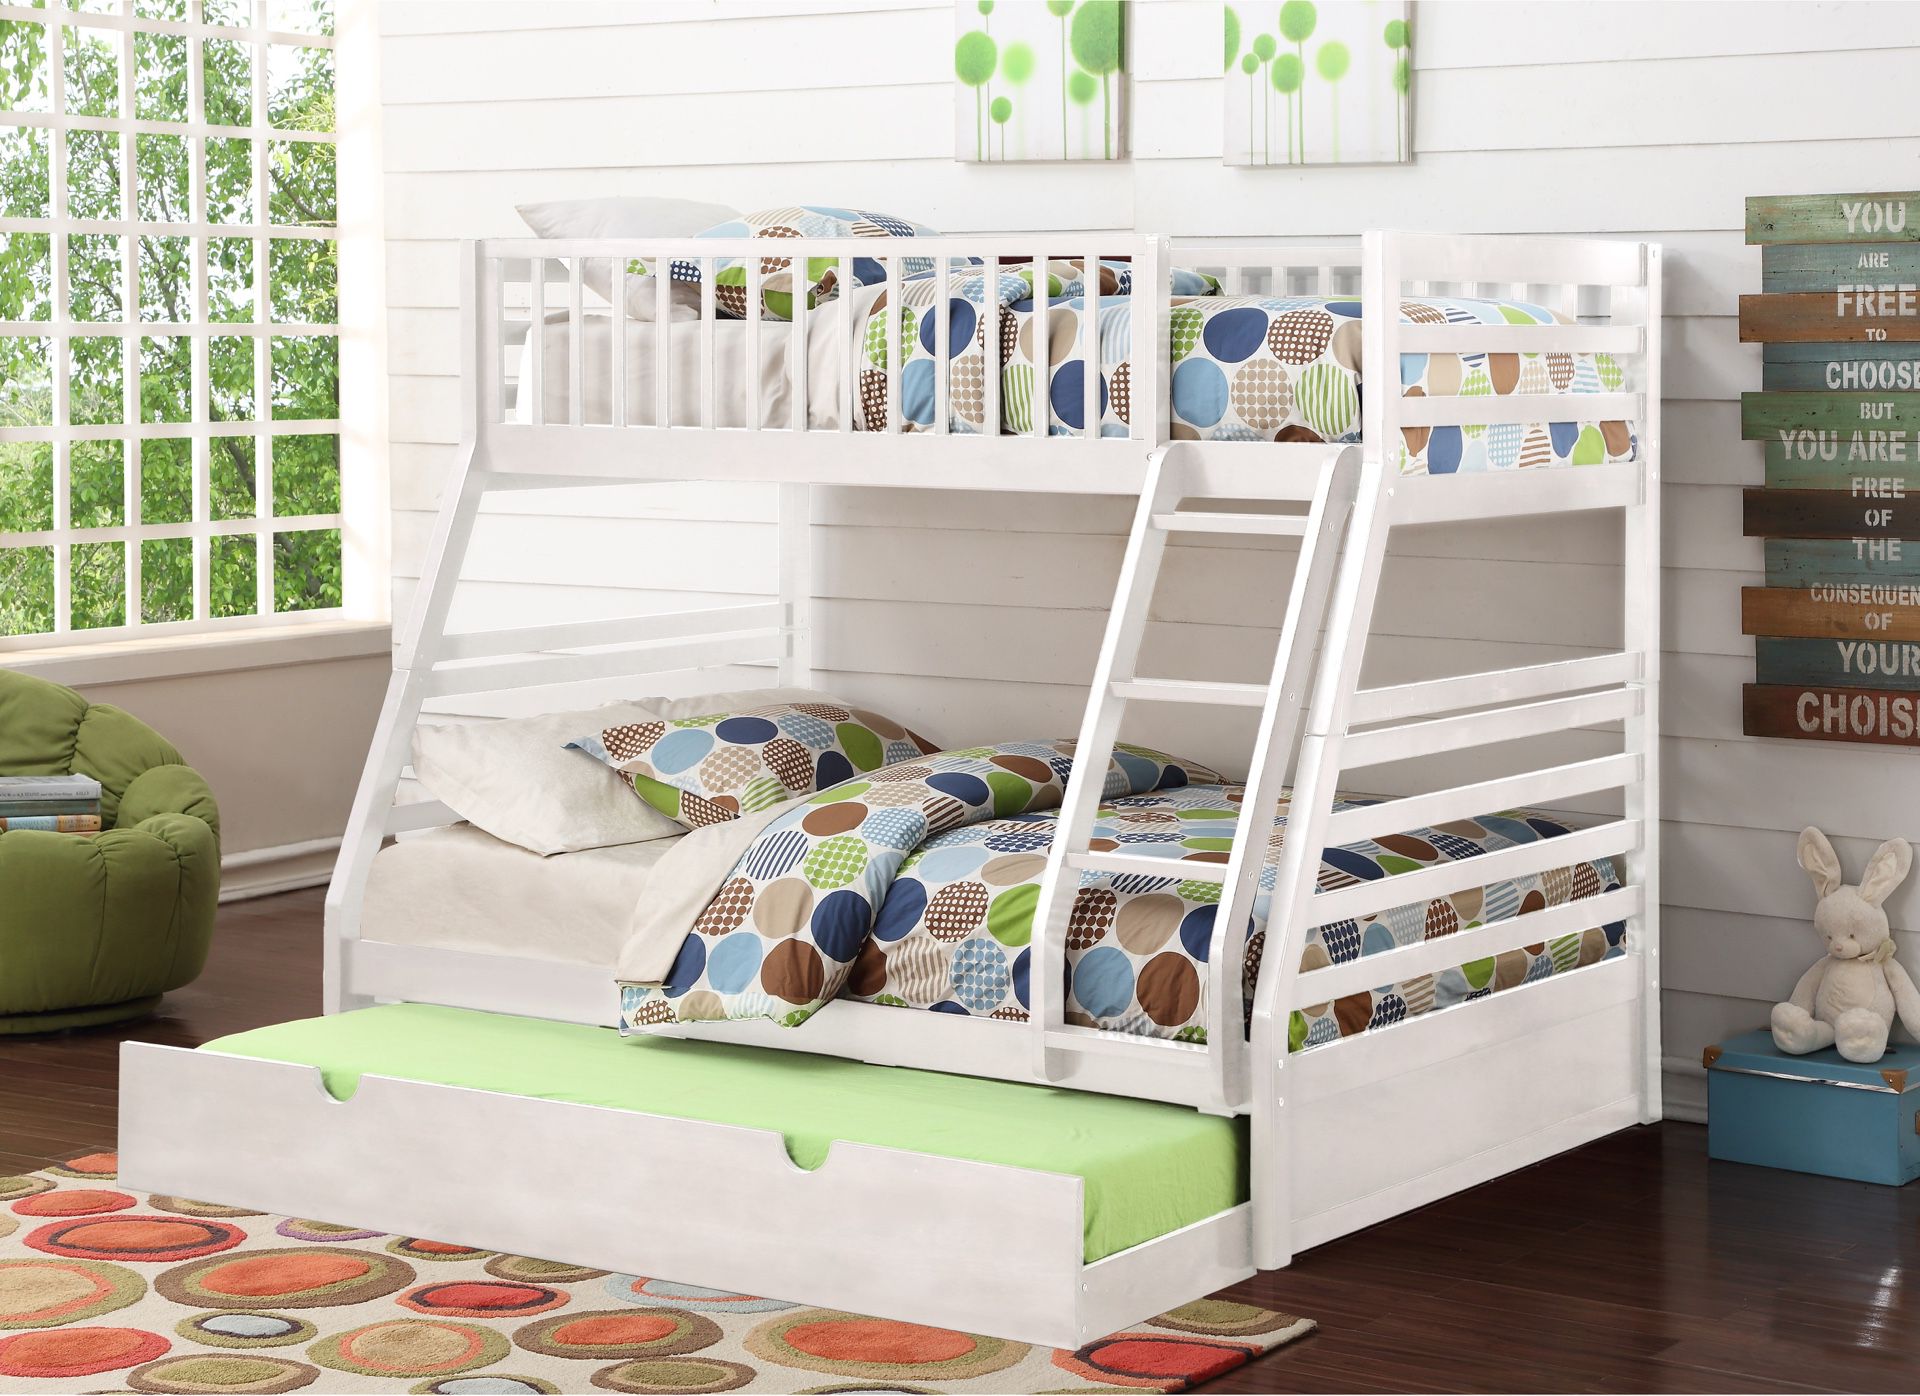 BRAND NEW TWIN SIZE OVER FULL SIZE BUNK BED + FREE TRUNDLE BED FRAME INCLUDED